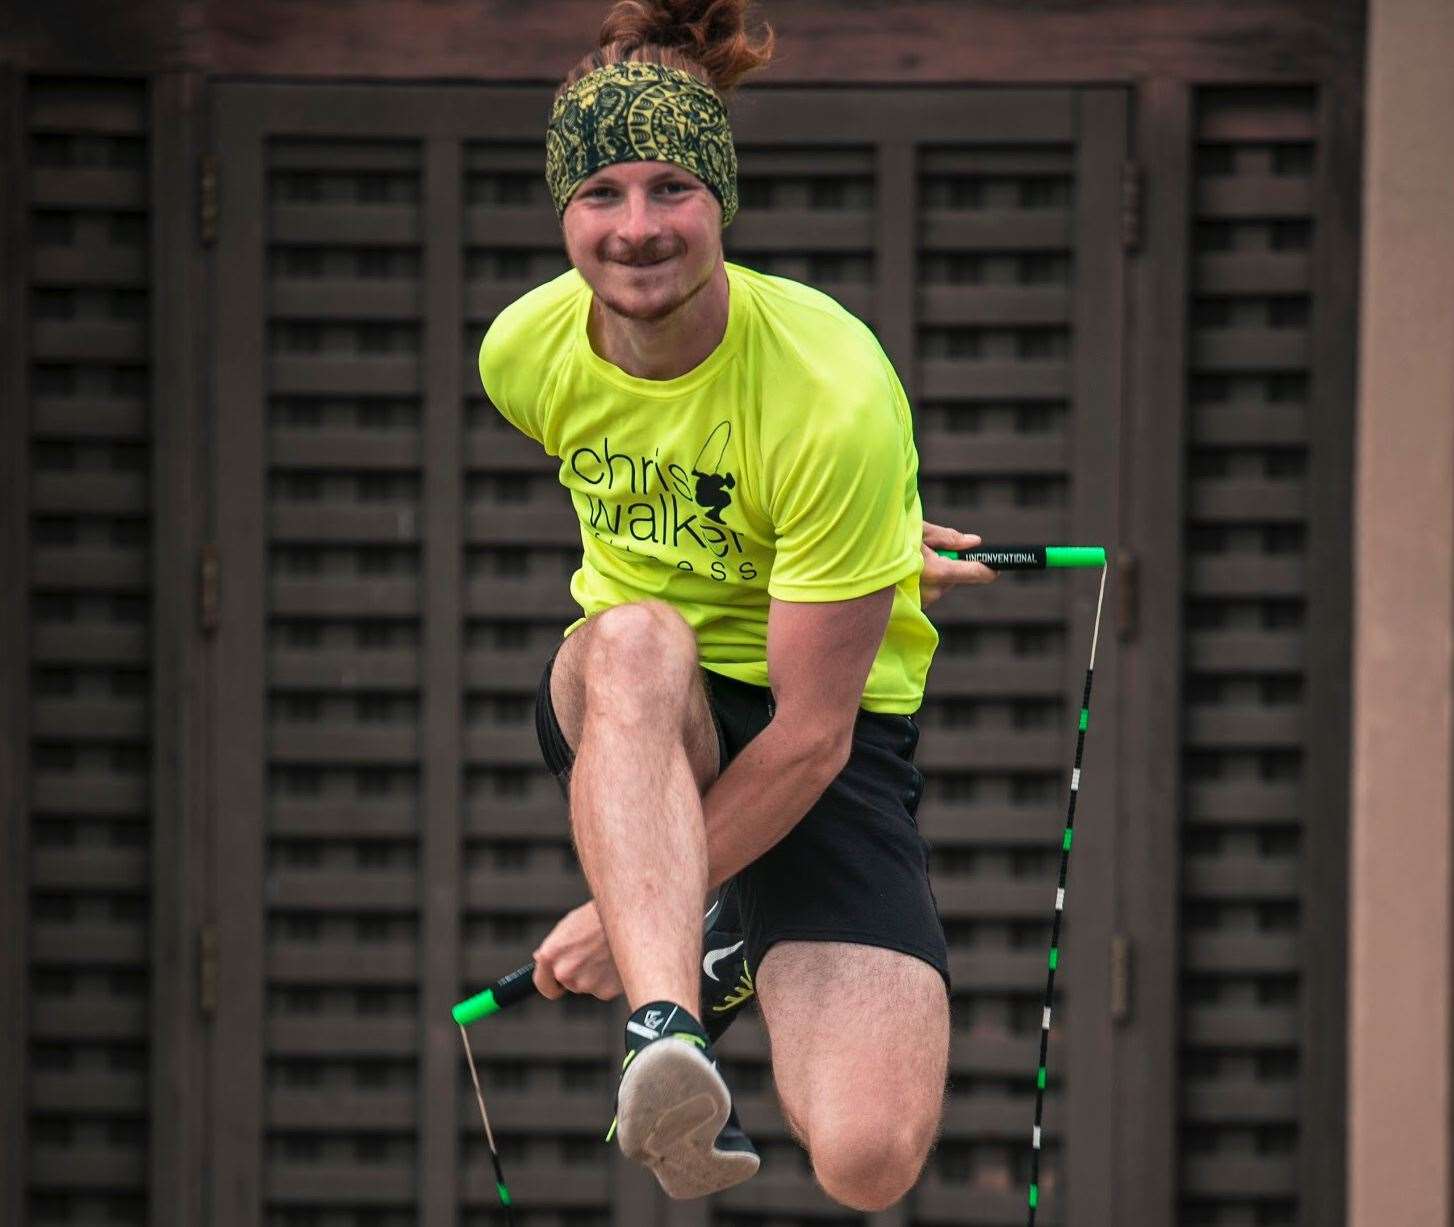 The Jump Rope Coach Chris Walker is campaigning to get people active and raise funds for the NHS at the same time